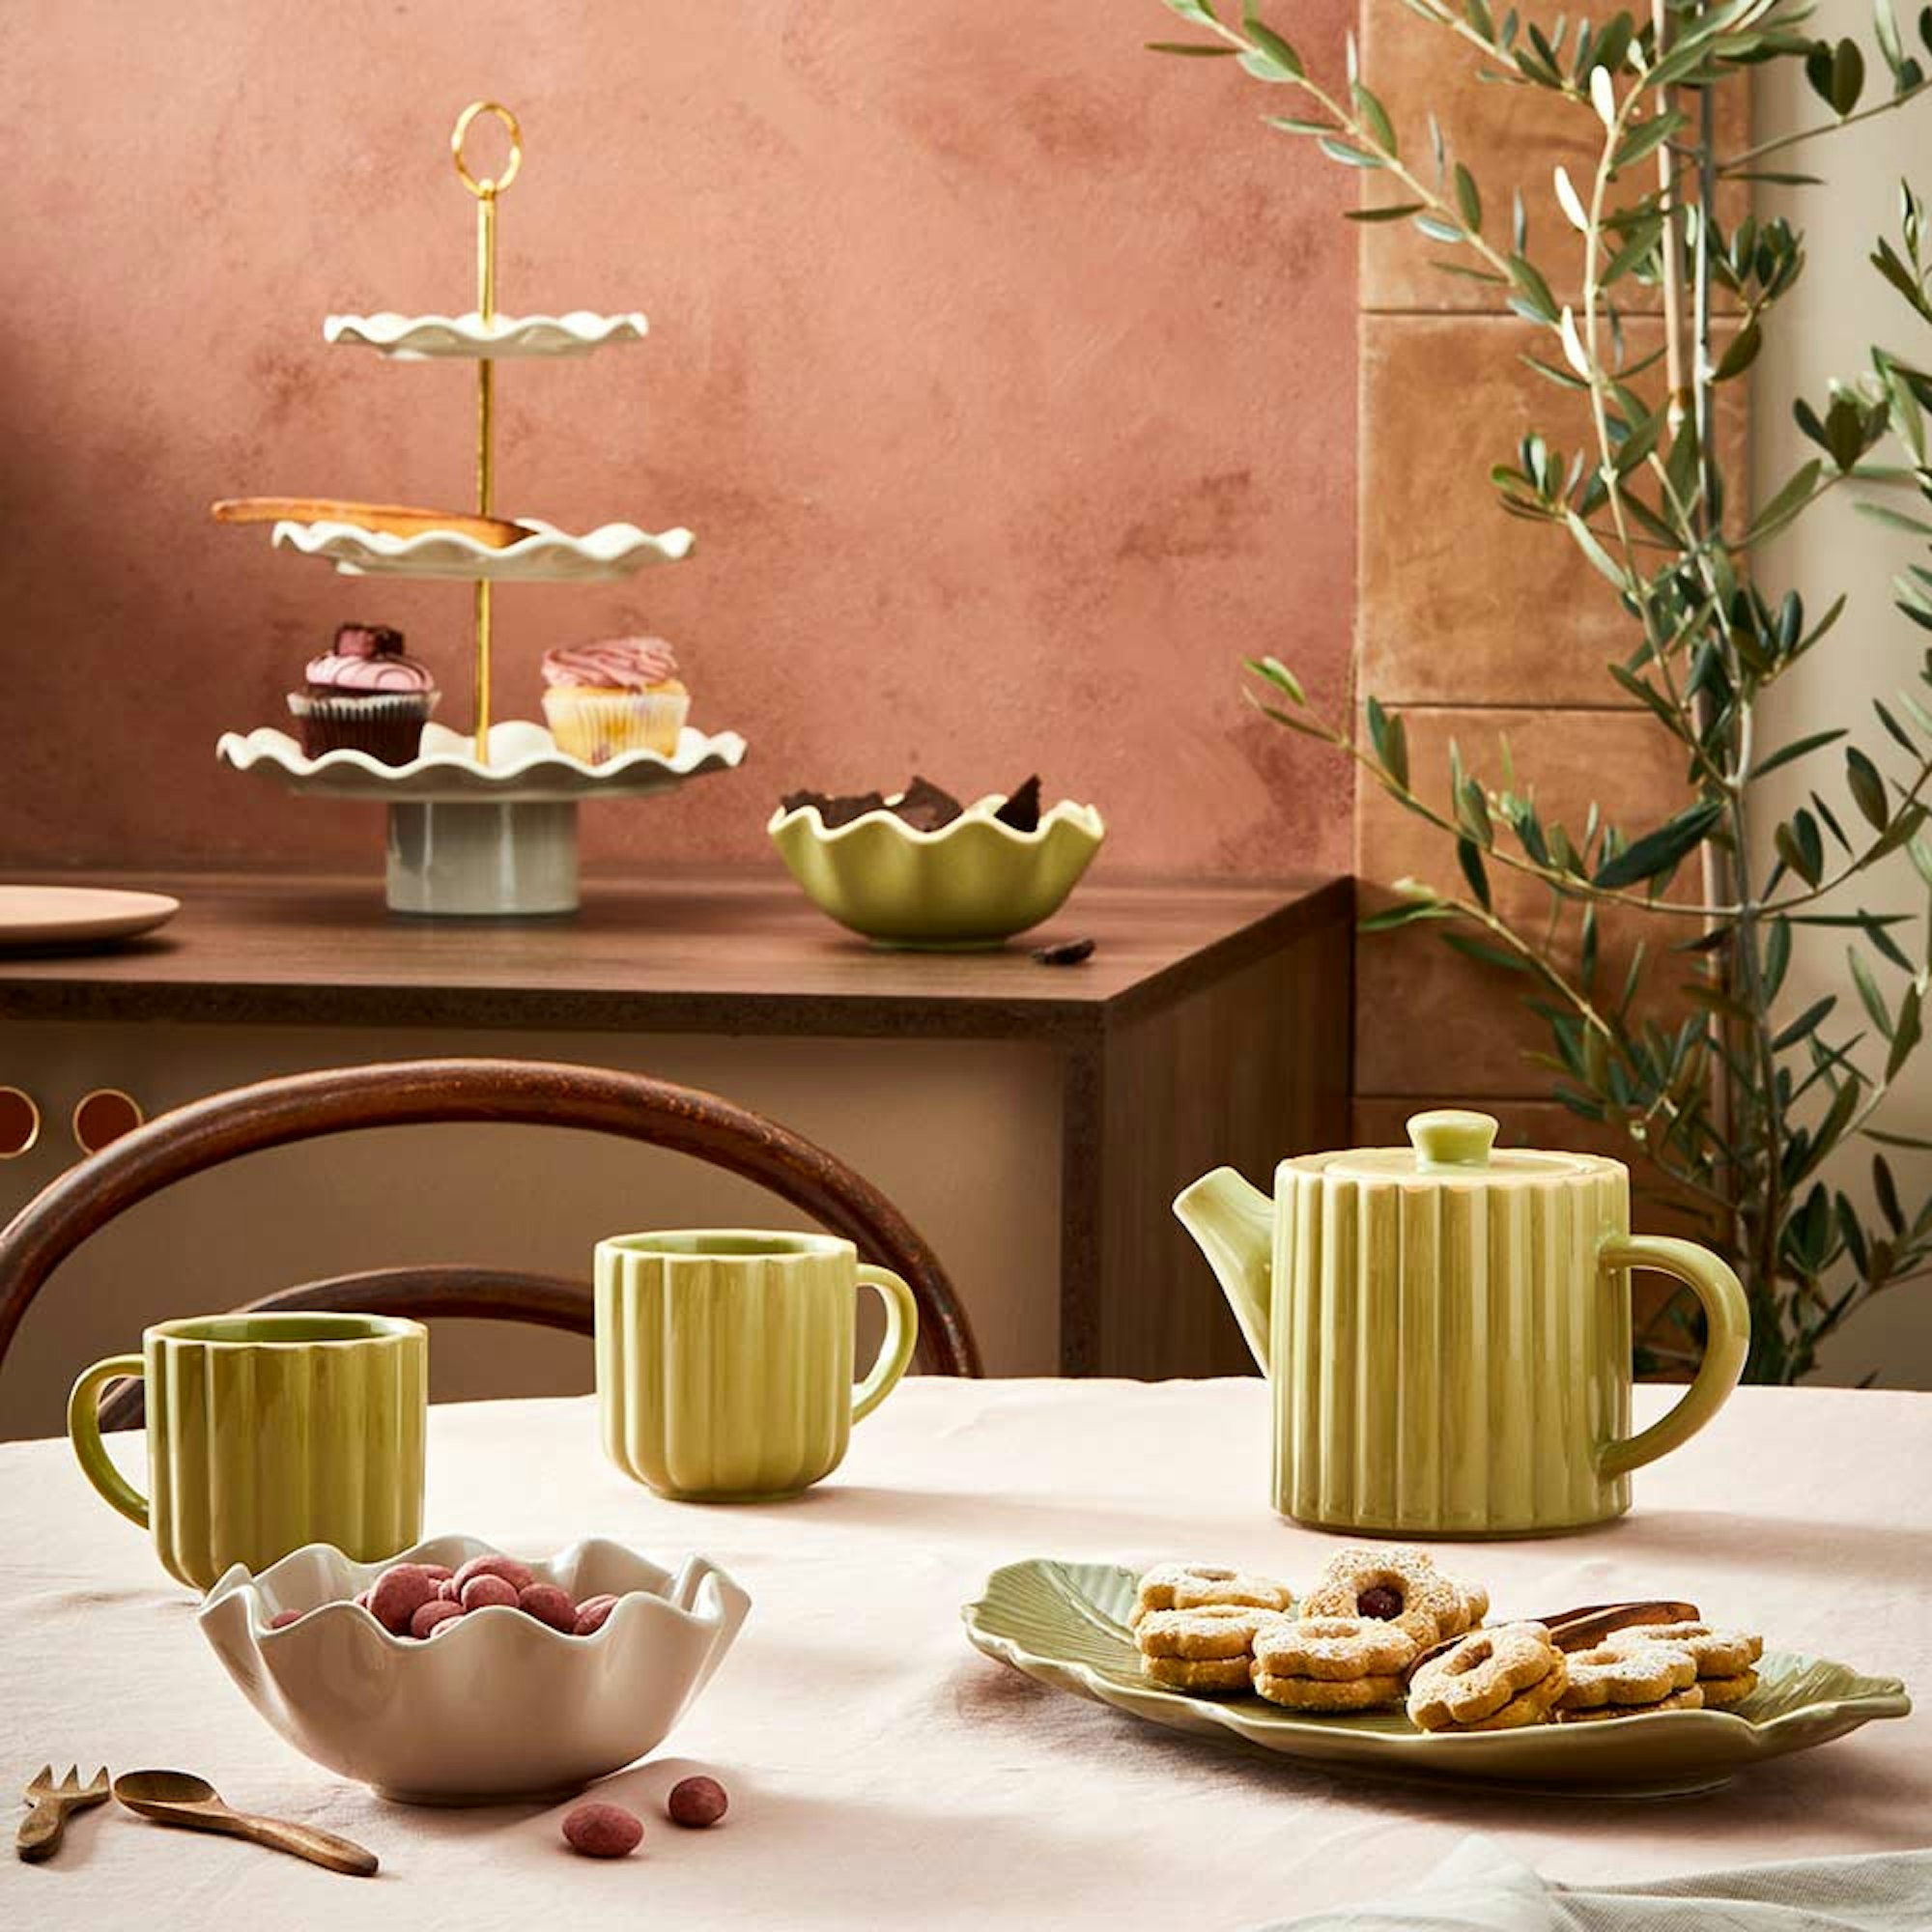 Alex Liddy Harley 3 tier cake stand. Mother's Day gift guide. High tea table setting with teapot, mugs, and 3 tier cake stand.